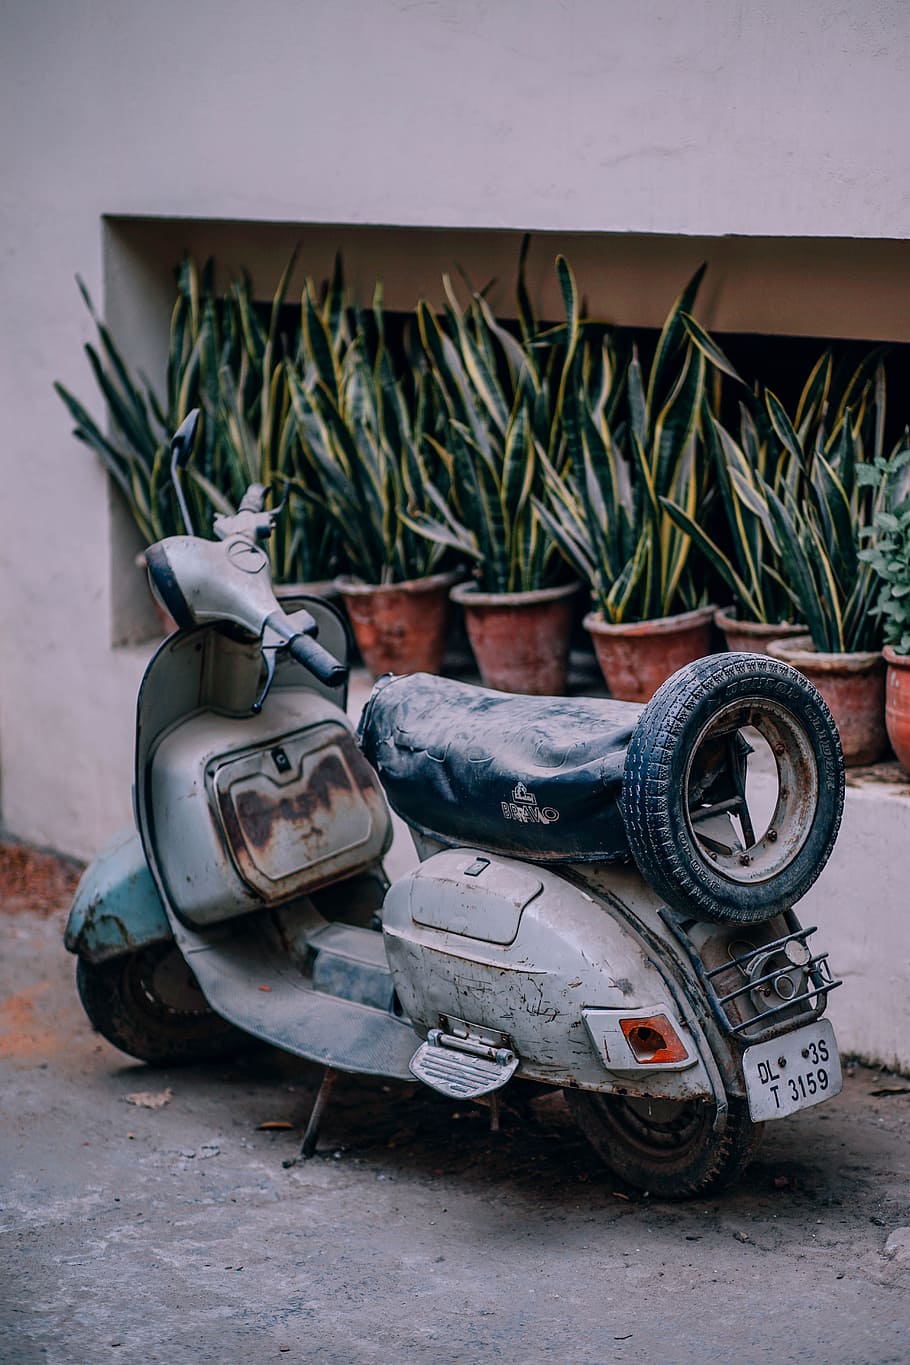 grey motor scooter parked near snake plants at daytime, ancient